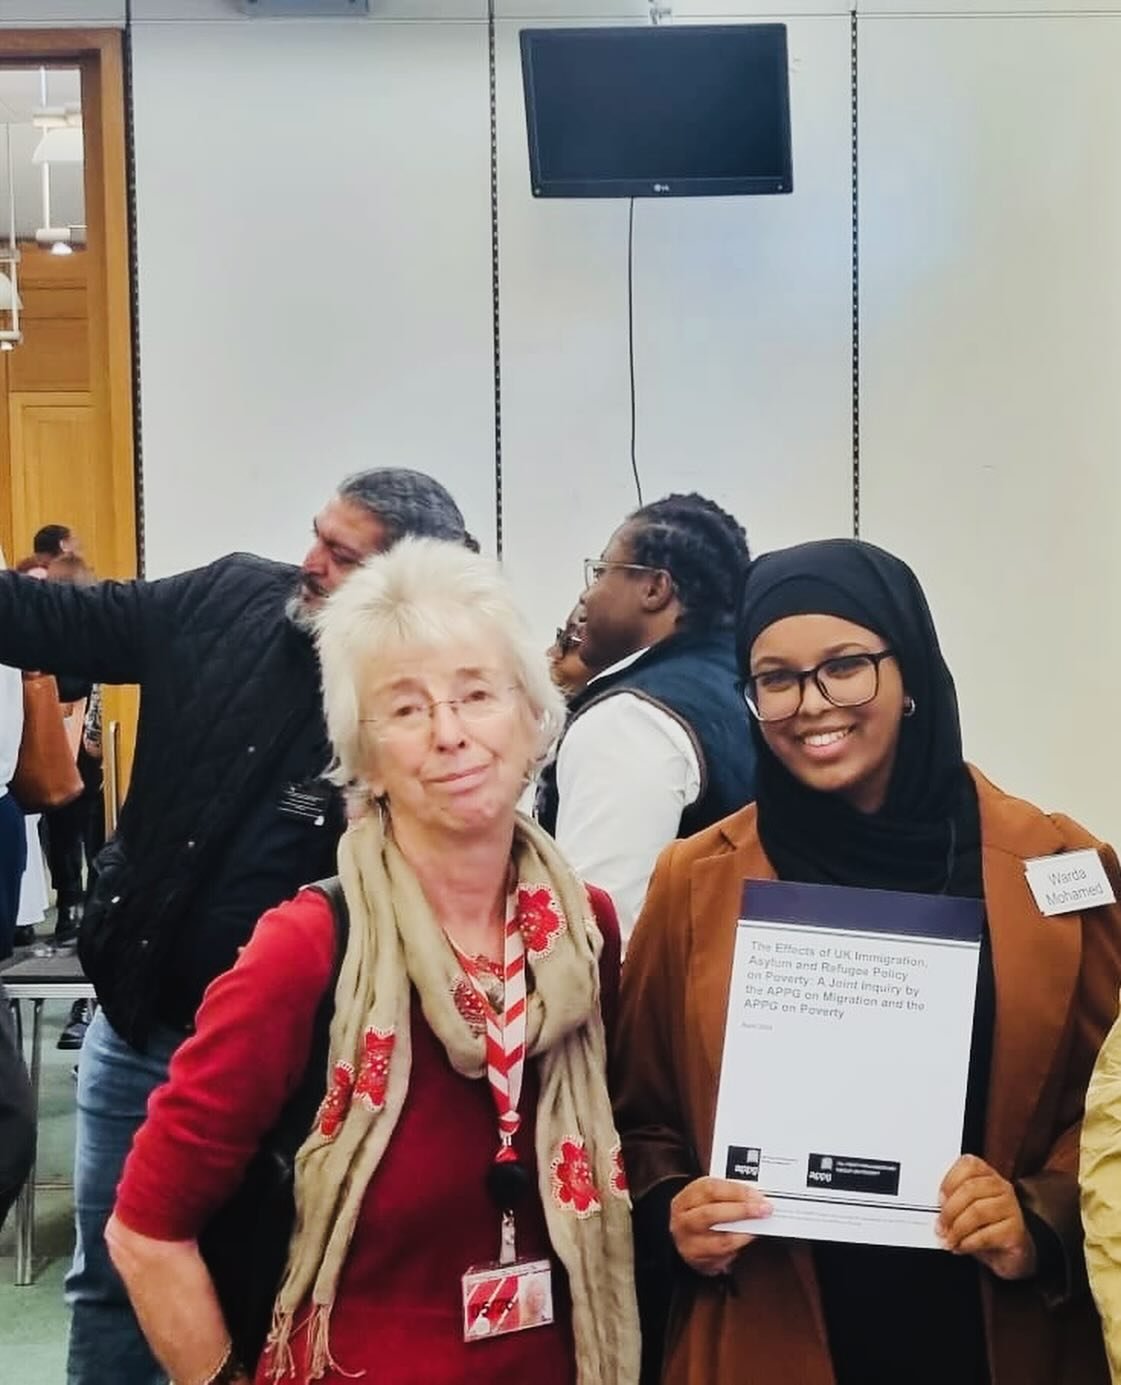 Grateful to have been part of the Report Launch on The Effects of UK Immigration Policy on Poverty. A huge thank you to Baroness Ruth Lister and Baroness Nosheena Mobarik for attentively hearing our concerns regarding unaccompanied asylum-seeking chi